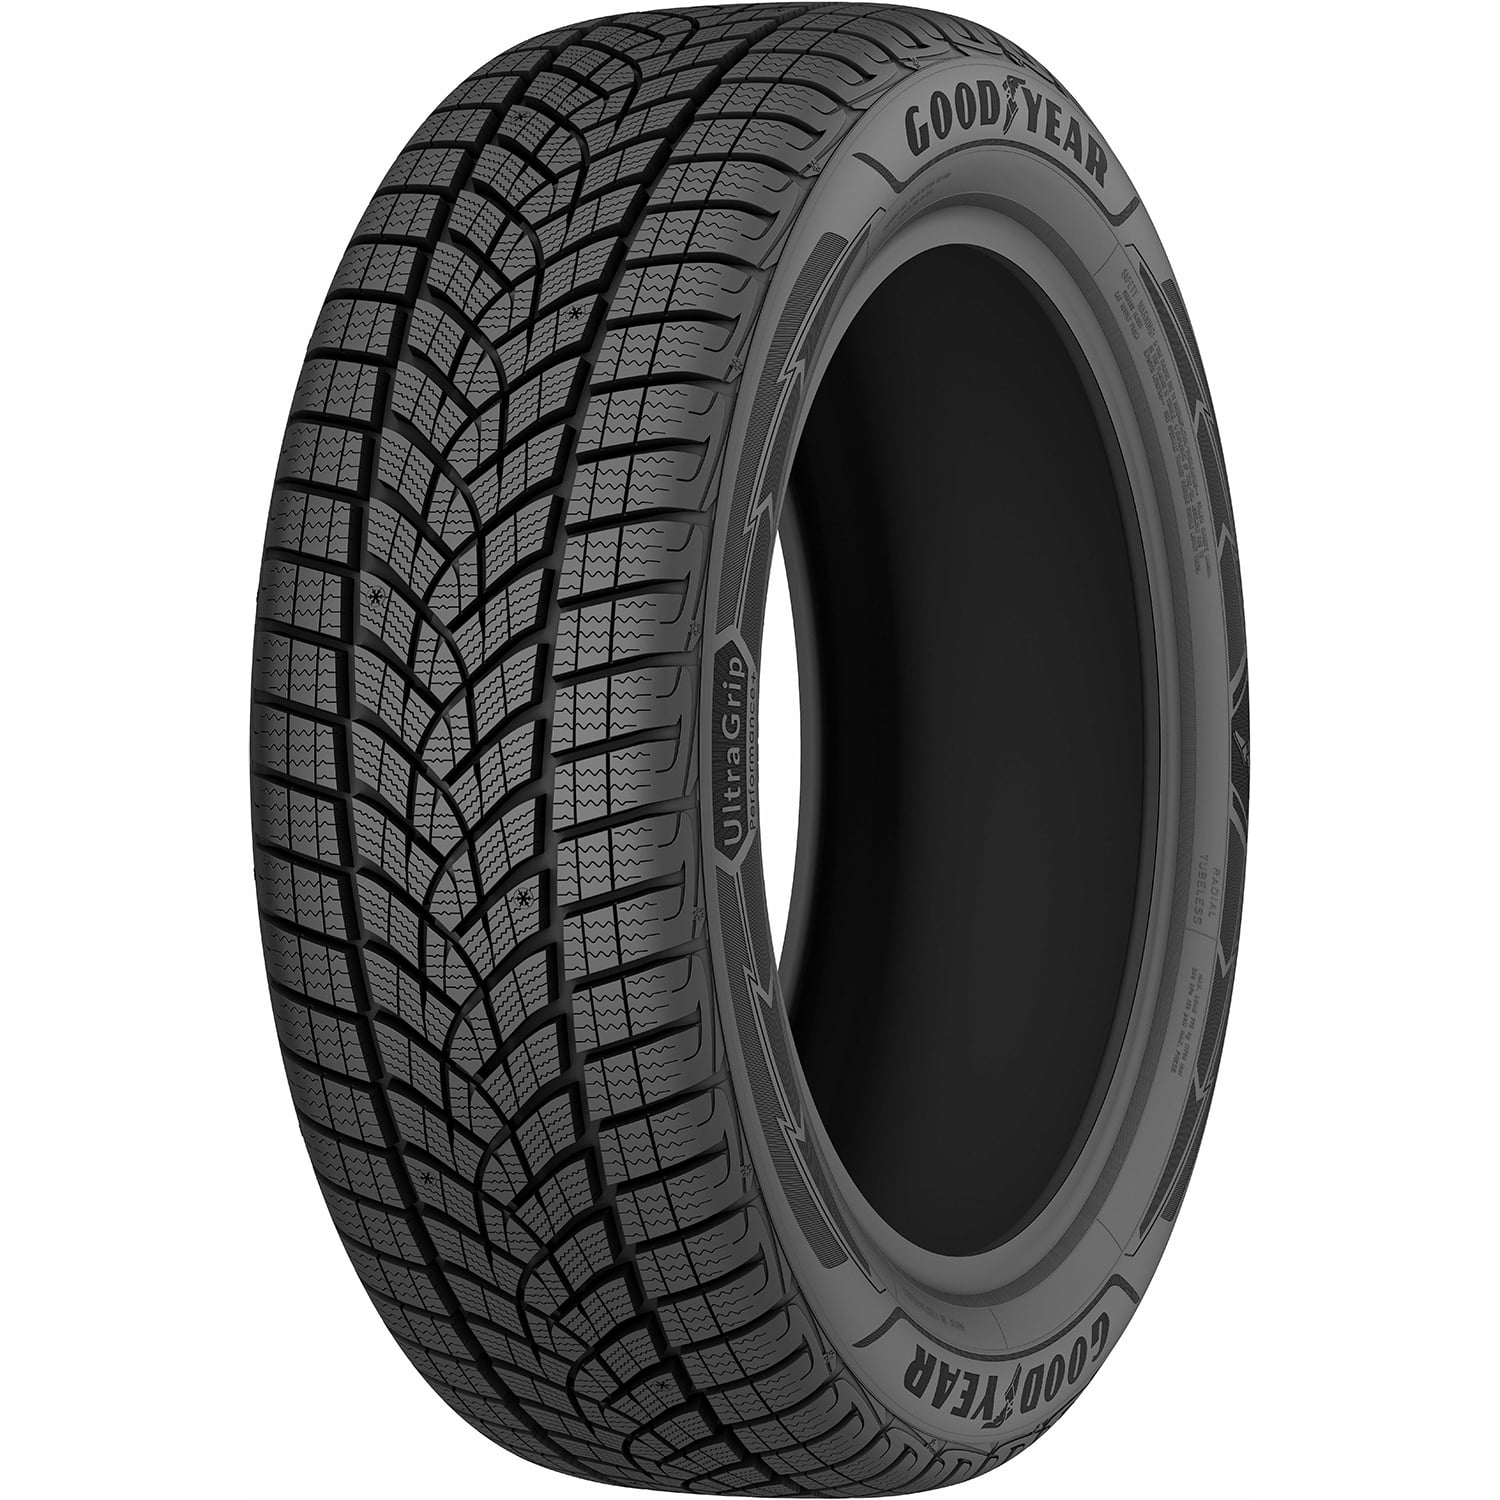 Goodyear Outback 102H 225/65R17 SUV Subaru Plus Touring Chevrolet Fits: LT, 2015-17 2018-23 3.6R Ultra Performance Equinox Grip BSW